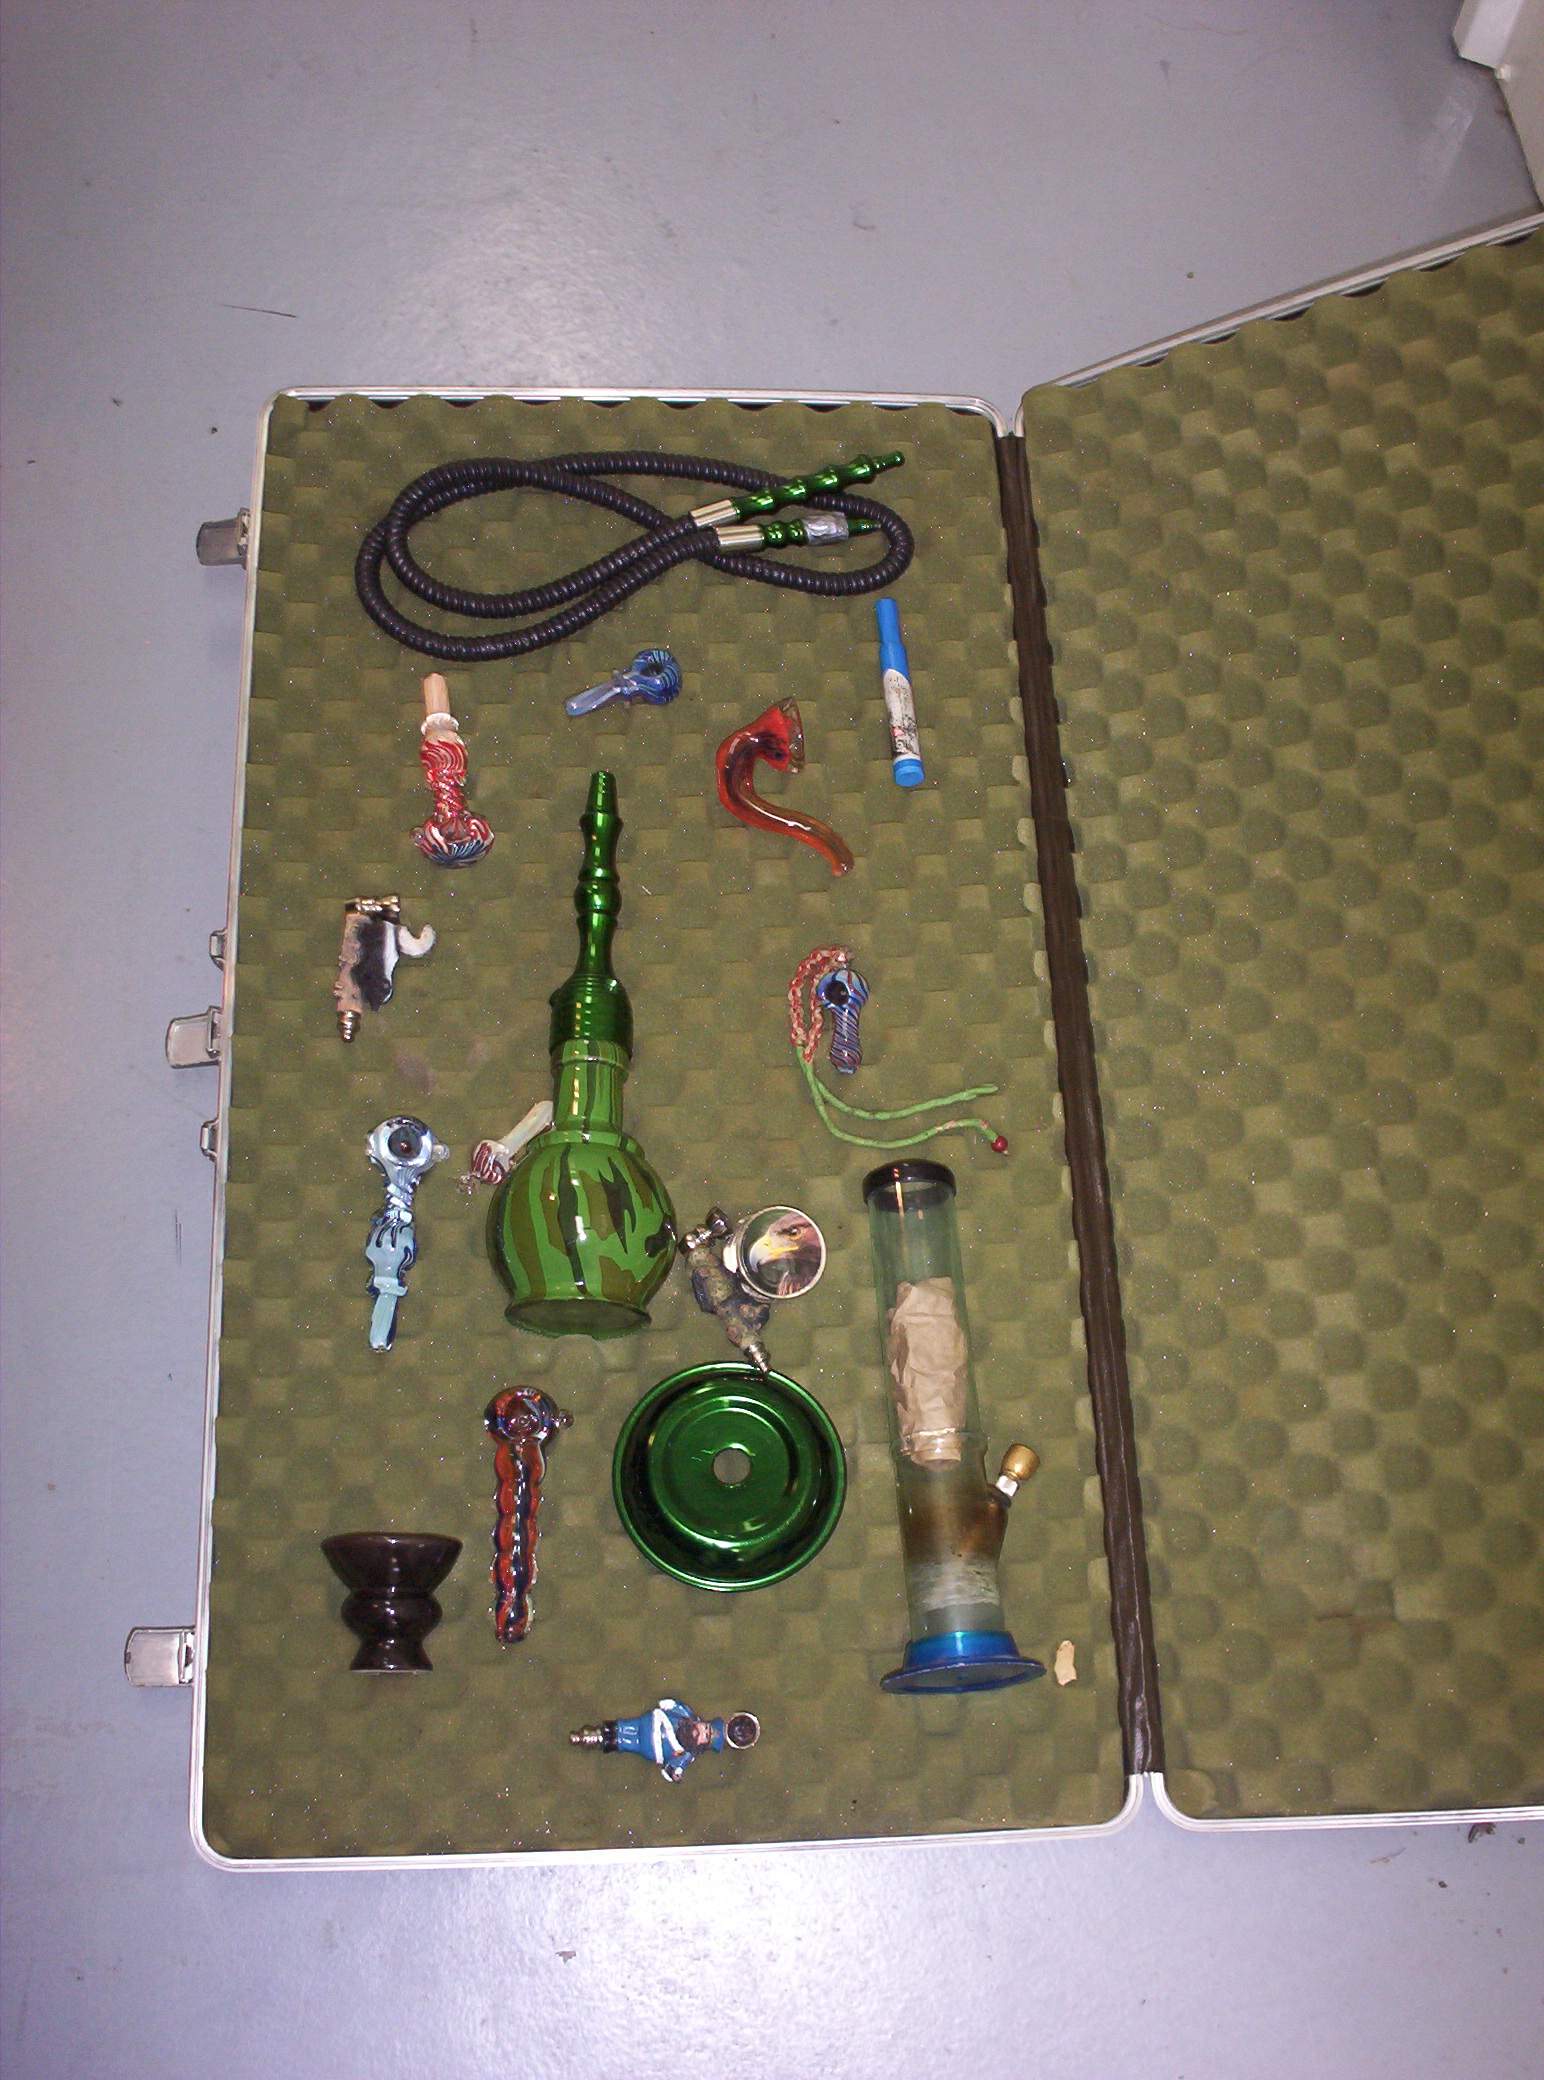 Party Kit